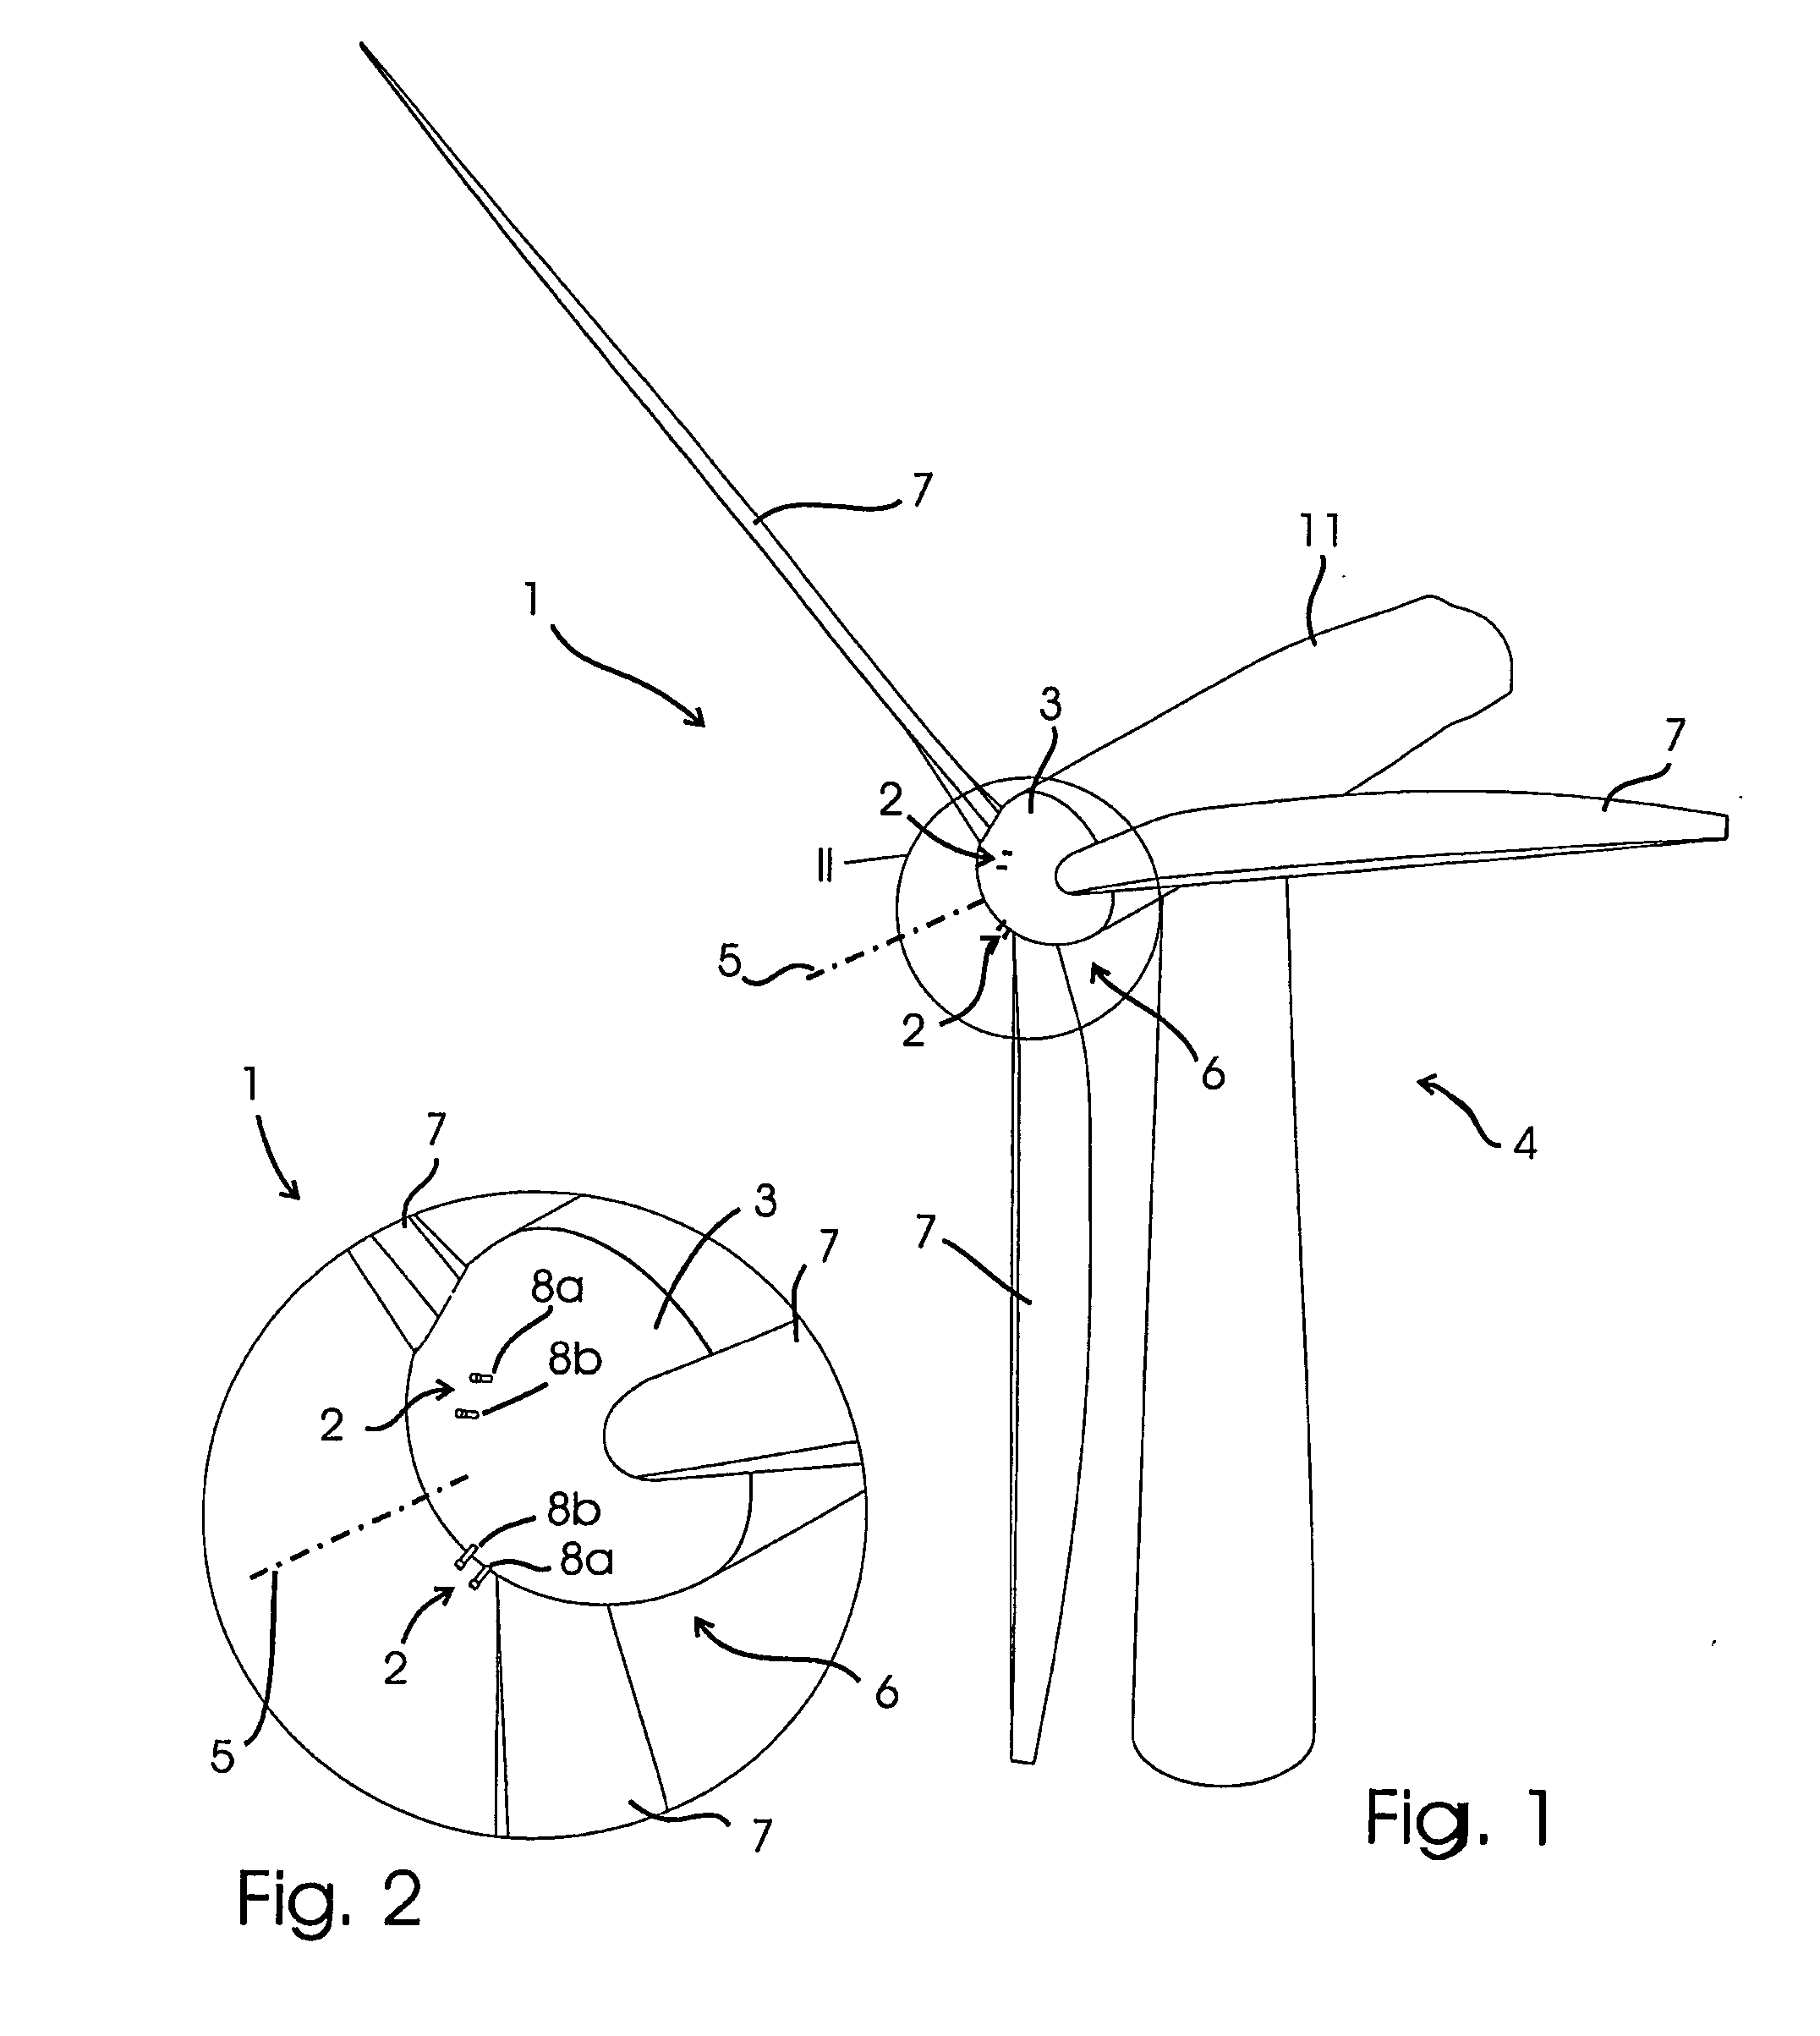 Method and apparatus to determine the wind speed and direction experienced by a wind turbine